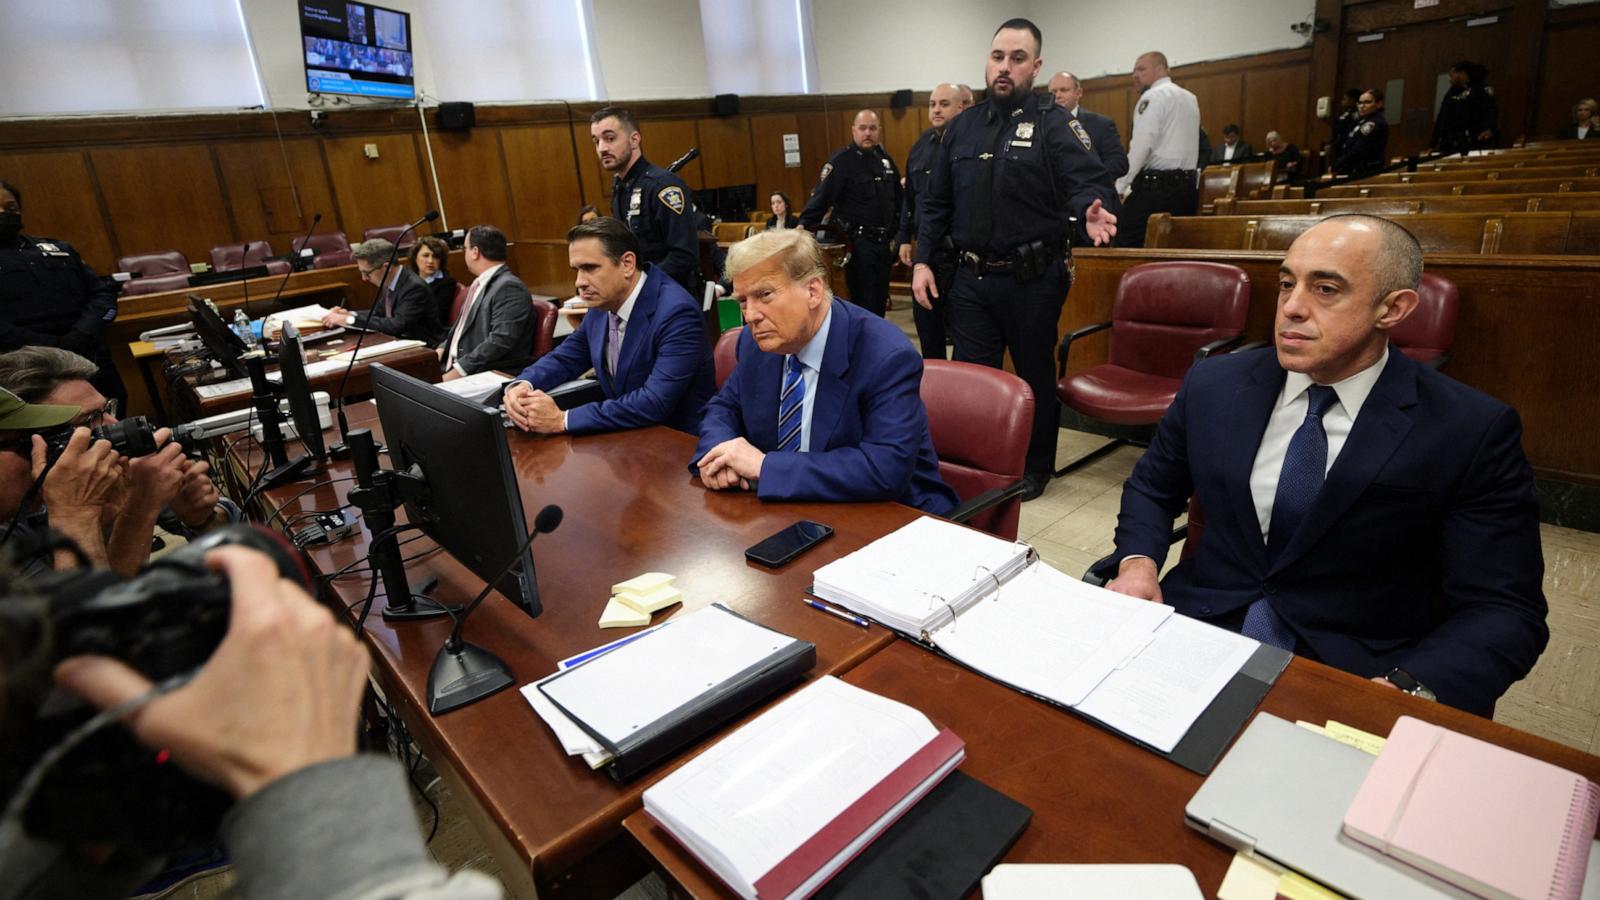 Concerns arise over Trump's audible muttering during jury selection process (Credits: ABC News)